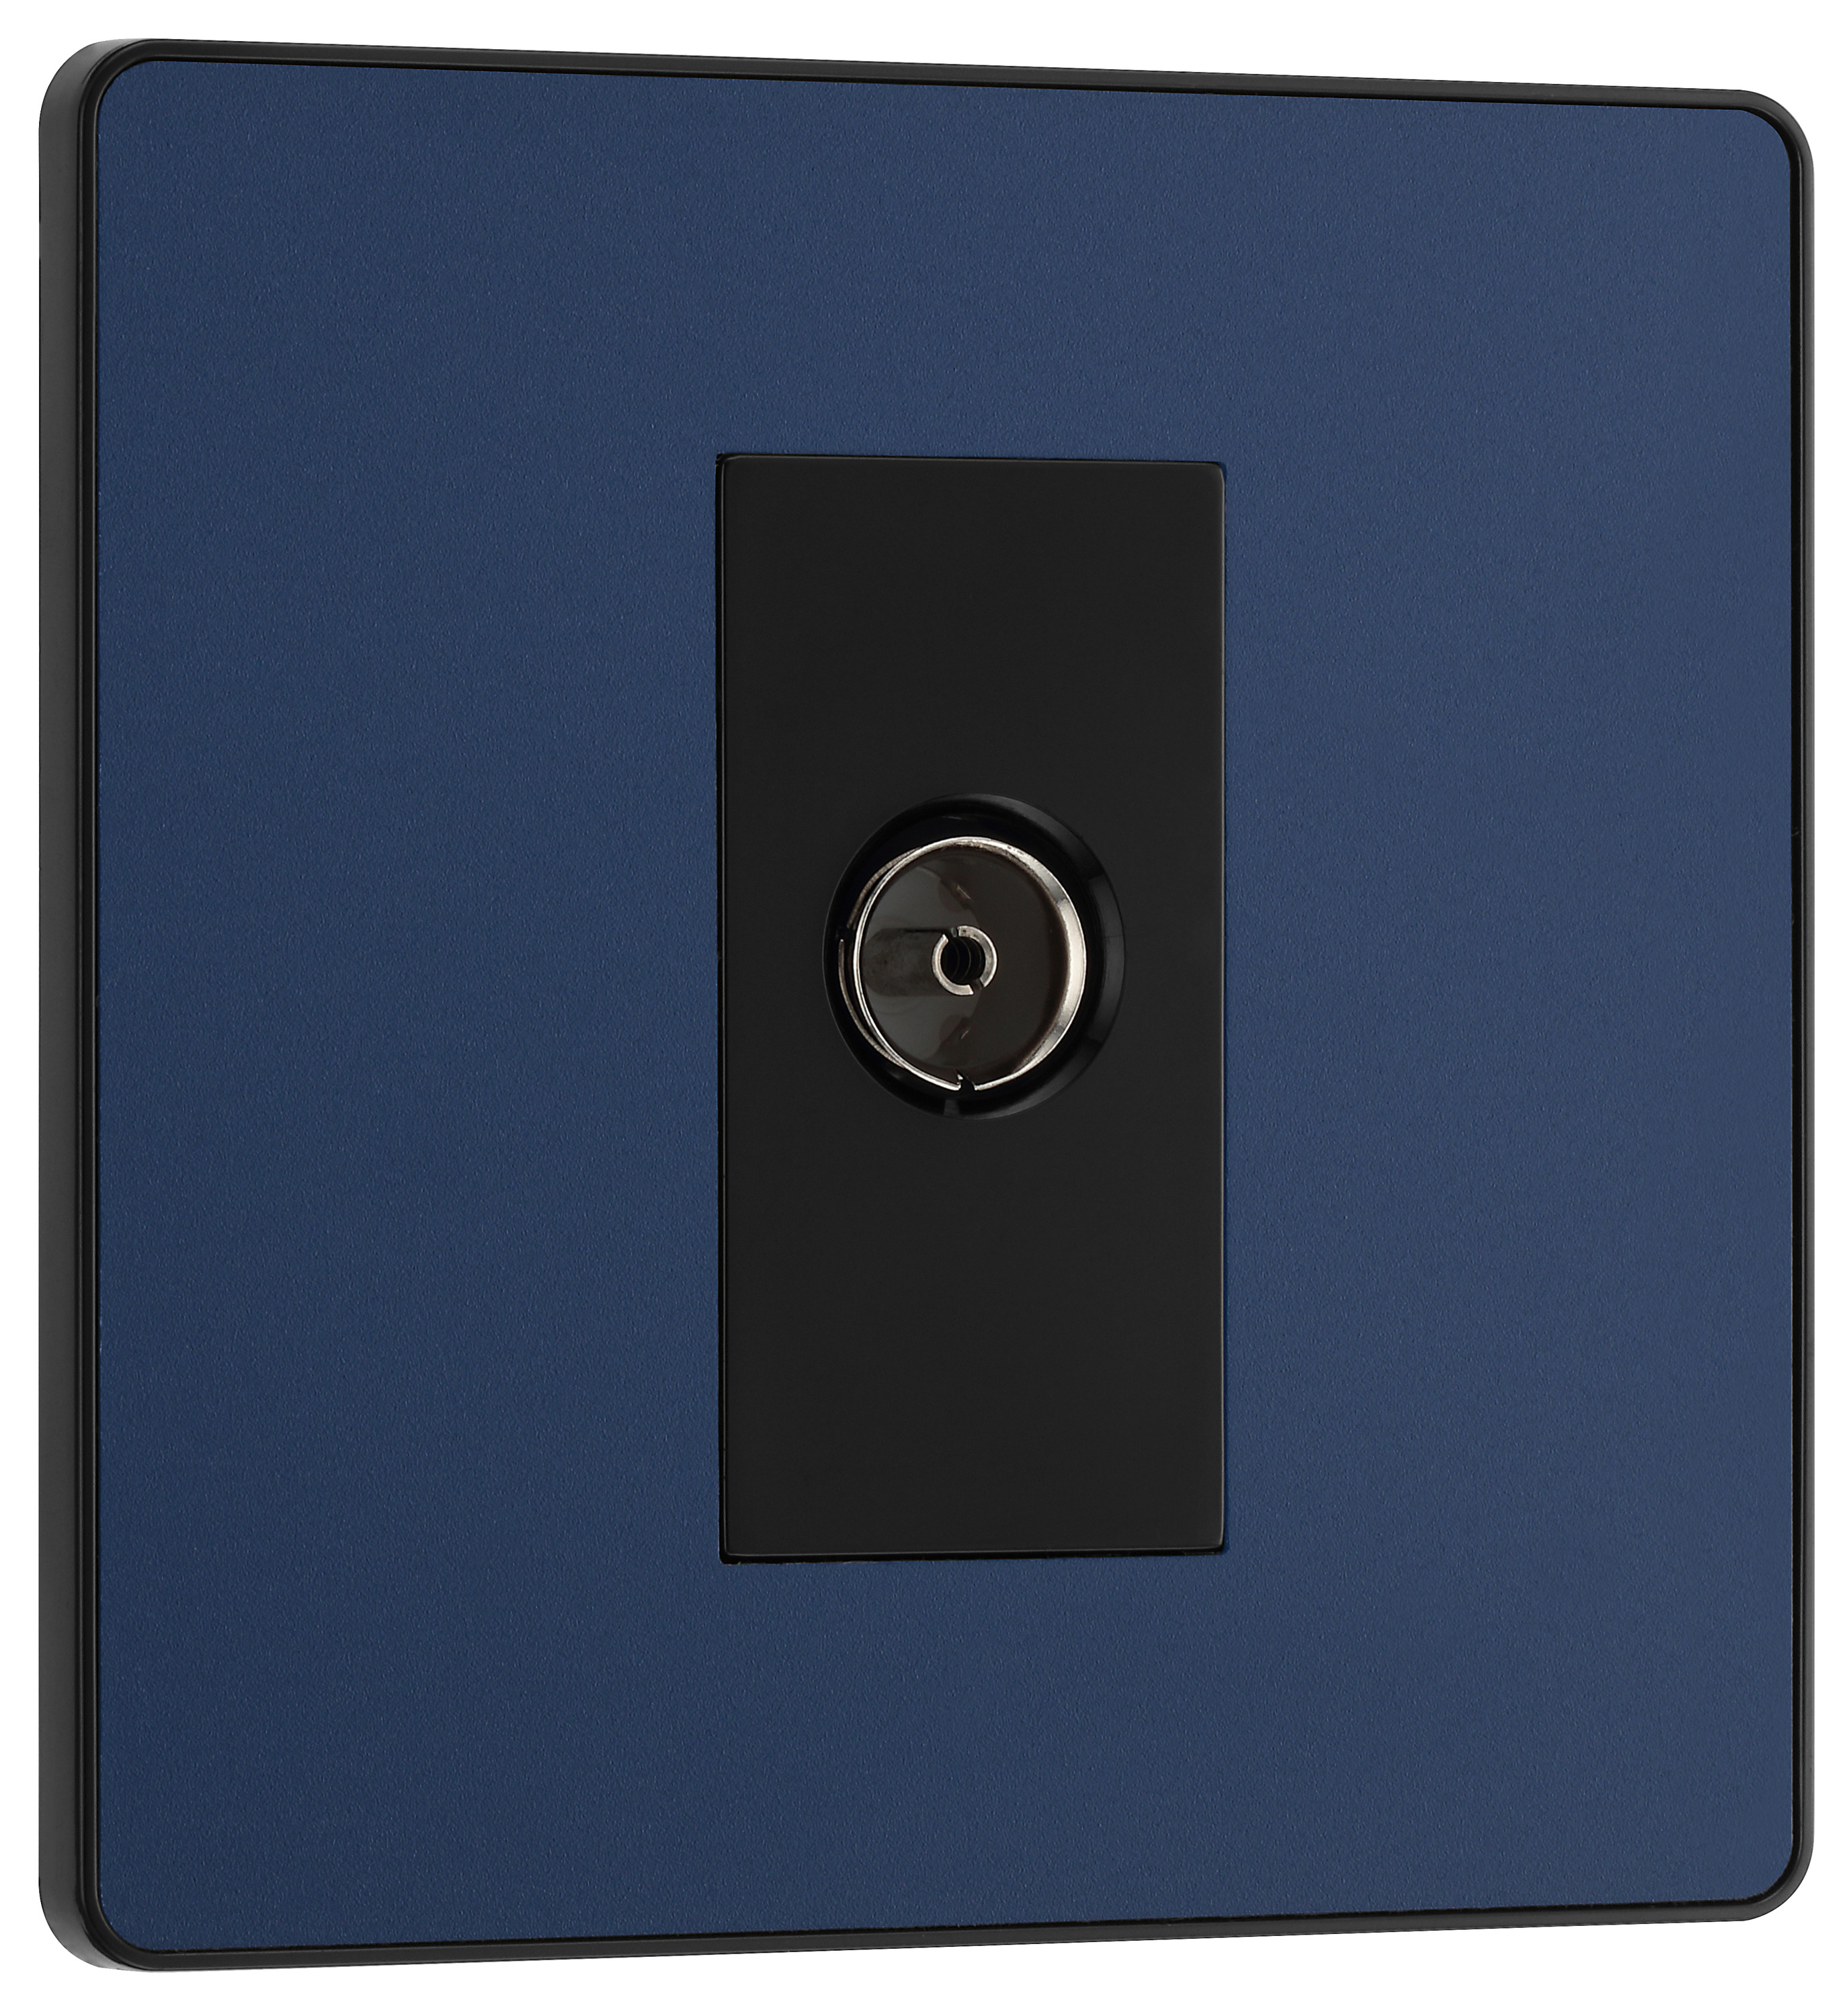 Image of BG Evolve Matt Blue Single Socket for TV or FM Co-Axial Aerial Connection